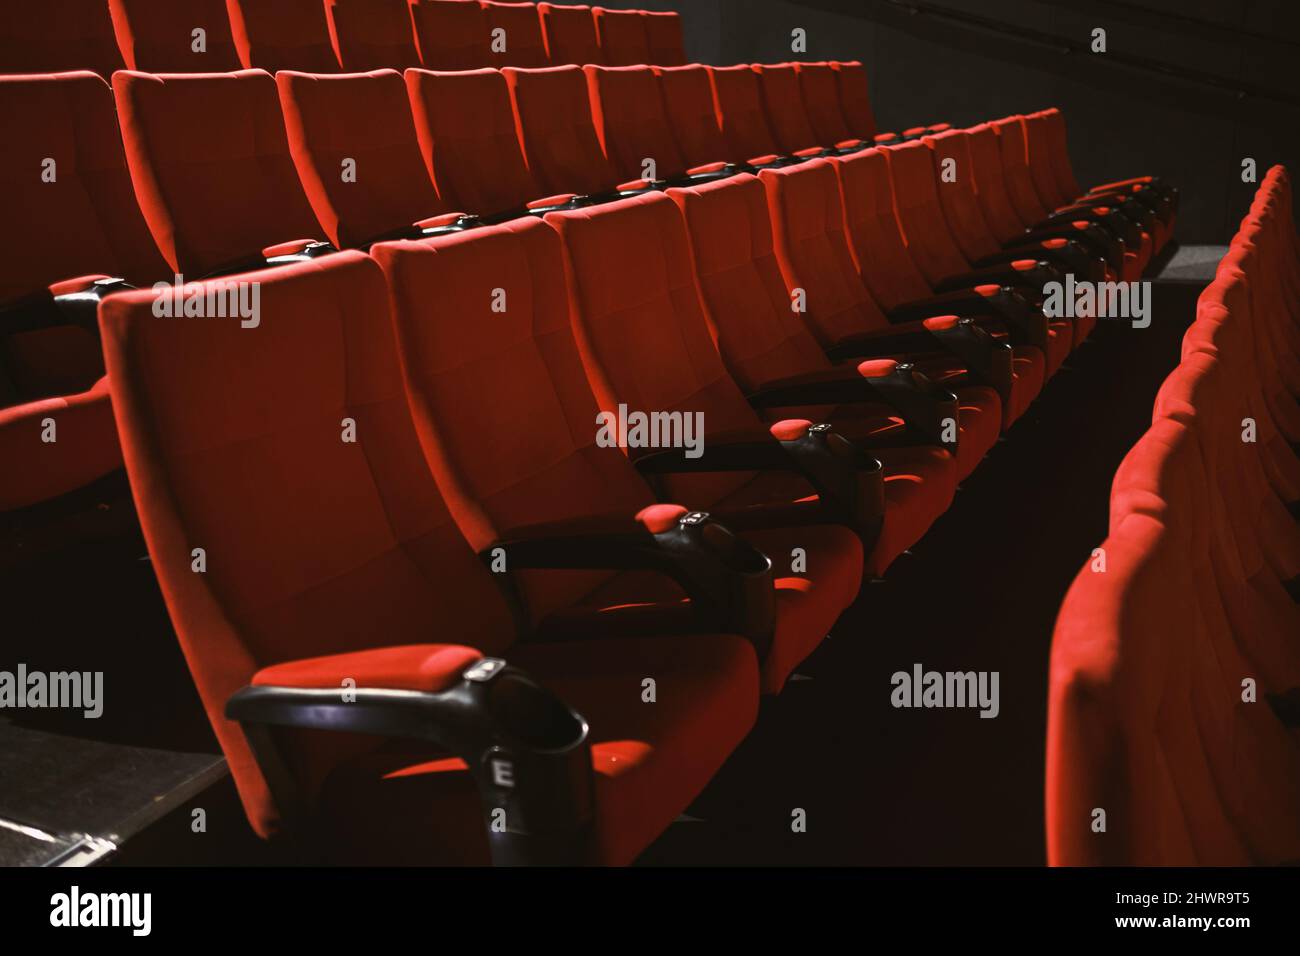 Red colored cinema seats with no people. Stock Photo